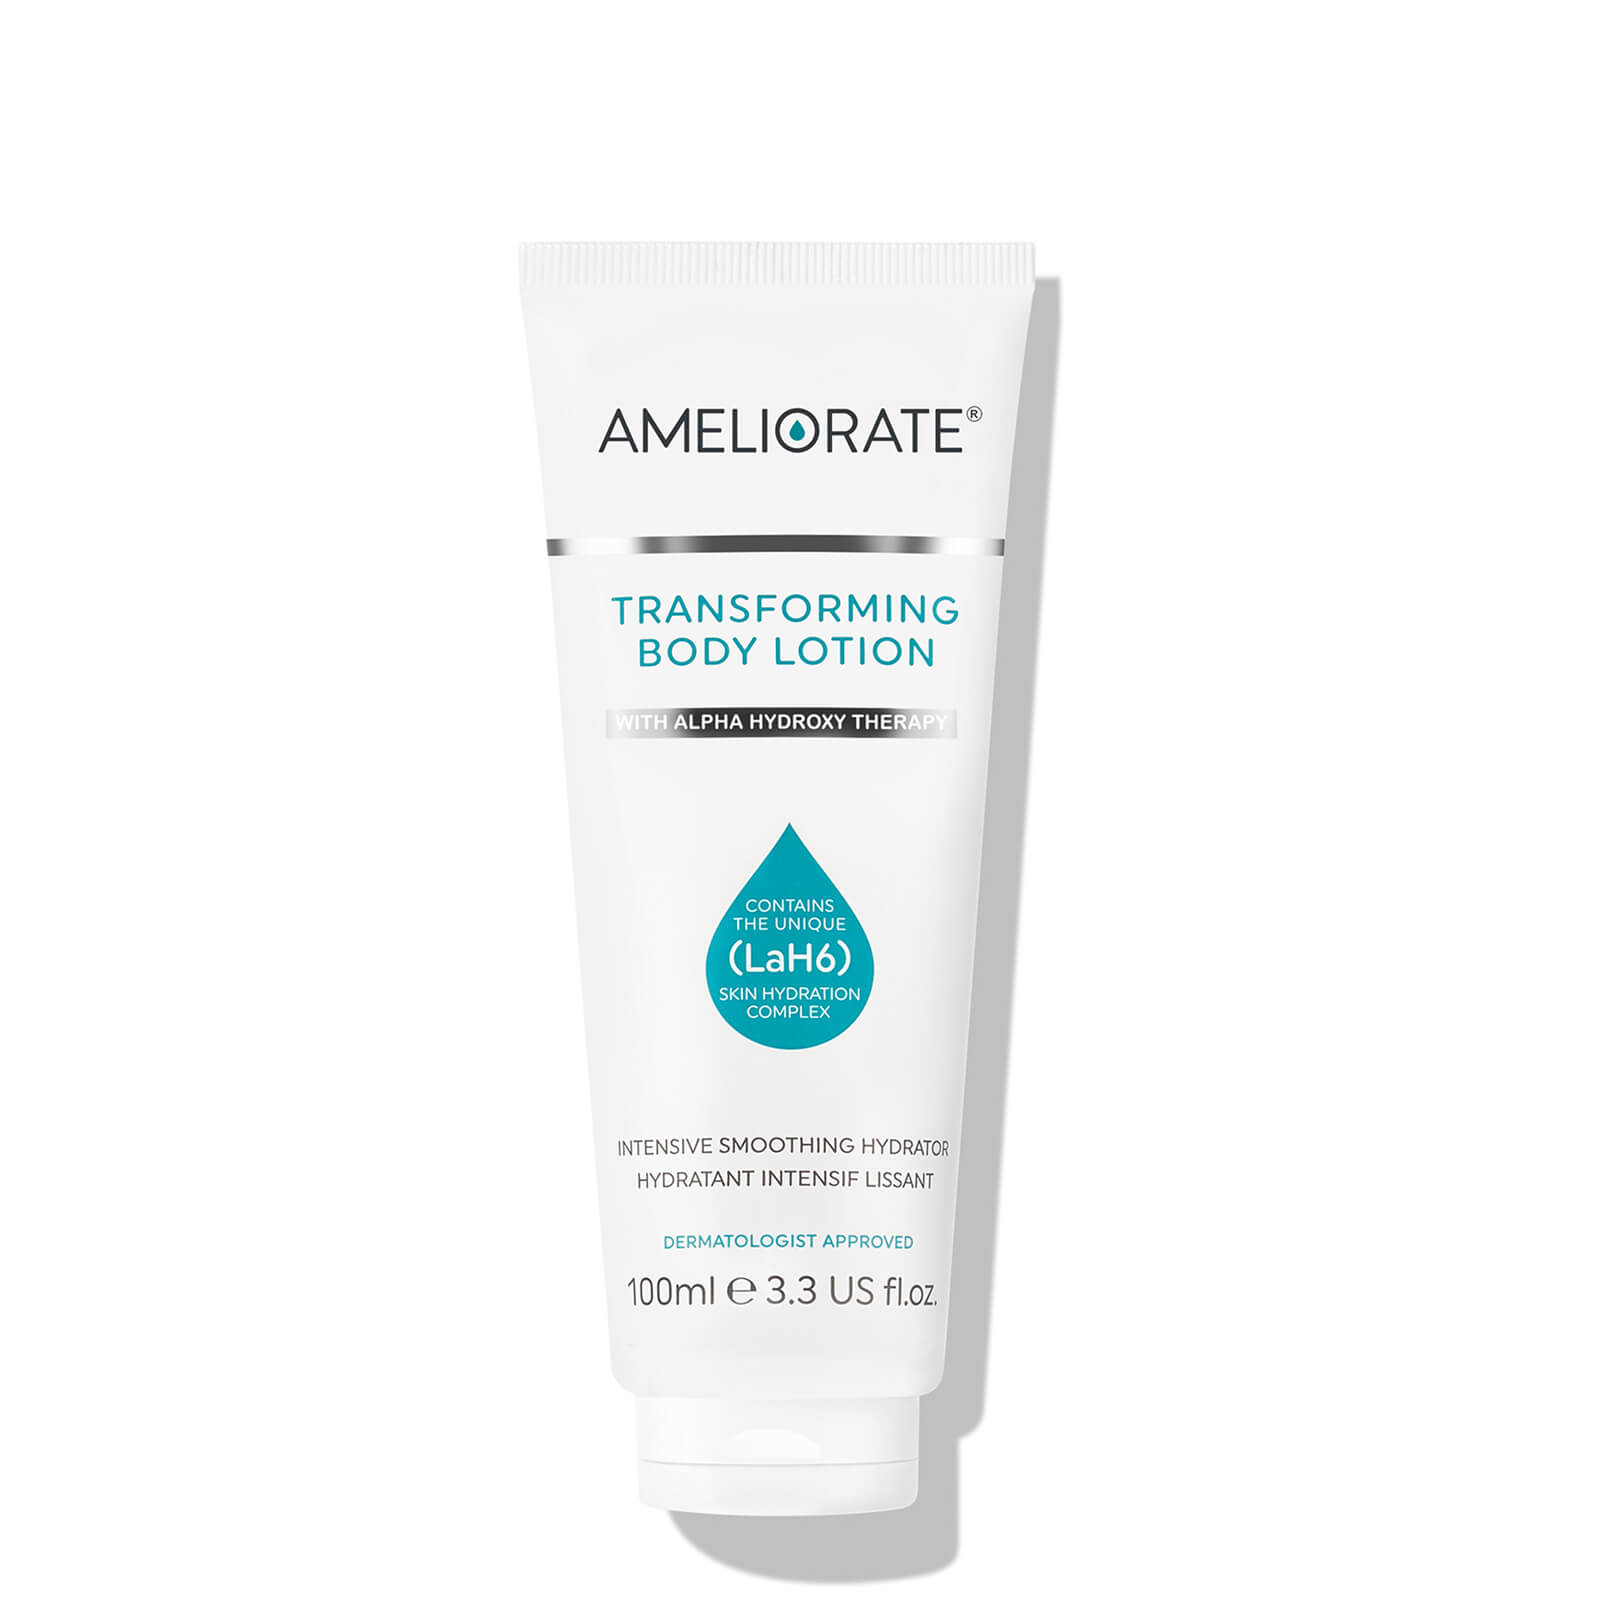 Image of AMELIORATE Transforming Body Lotion - 100ml